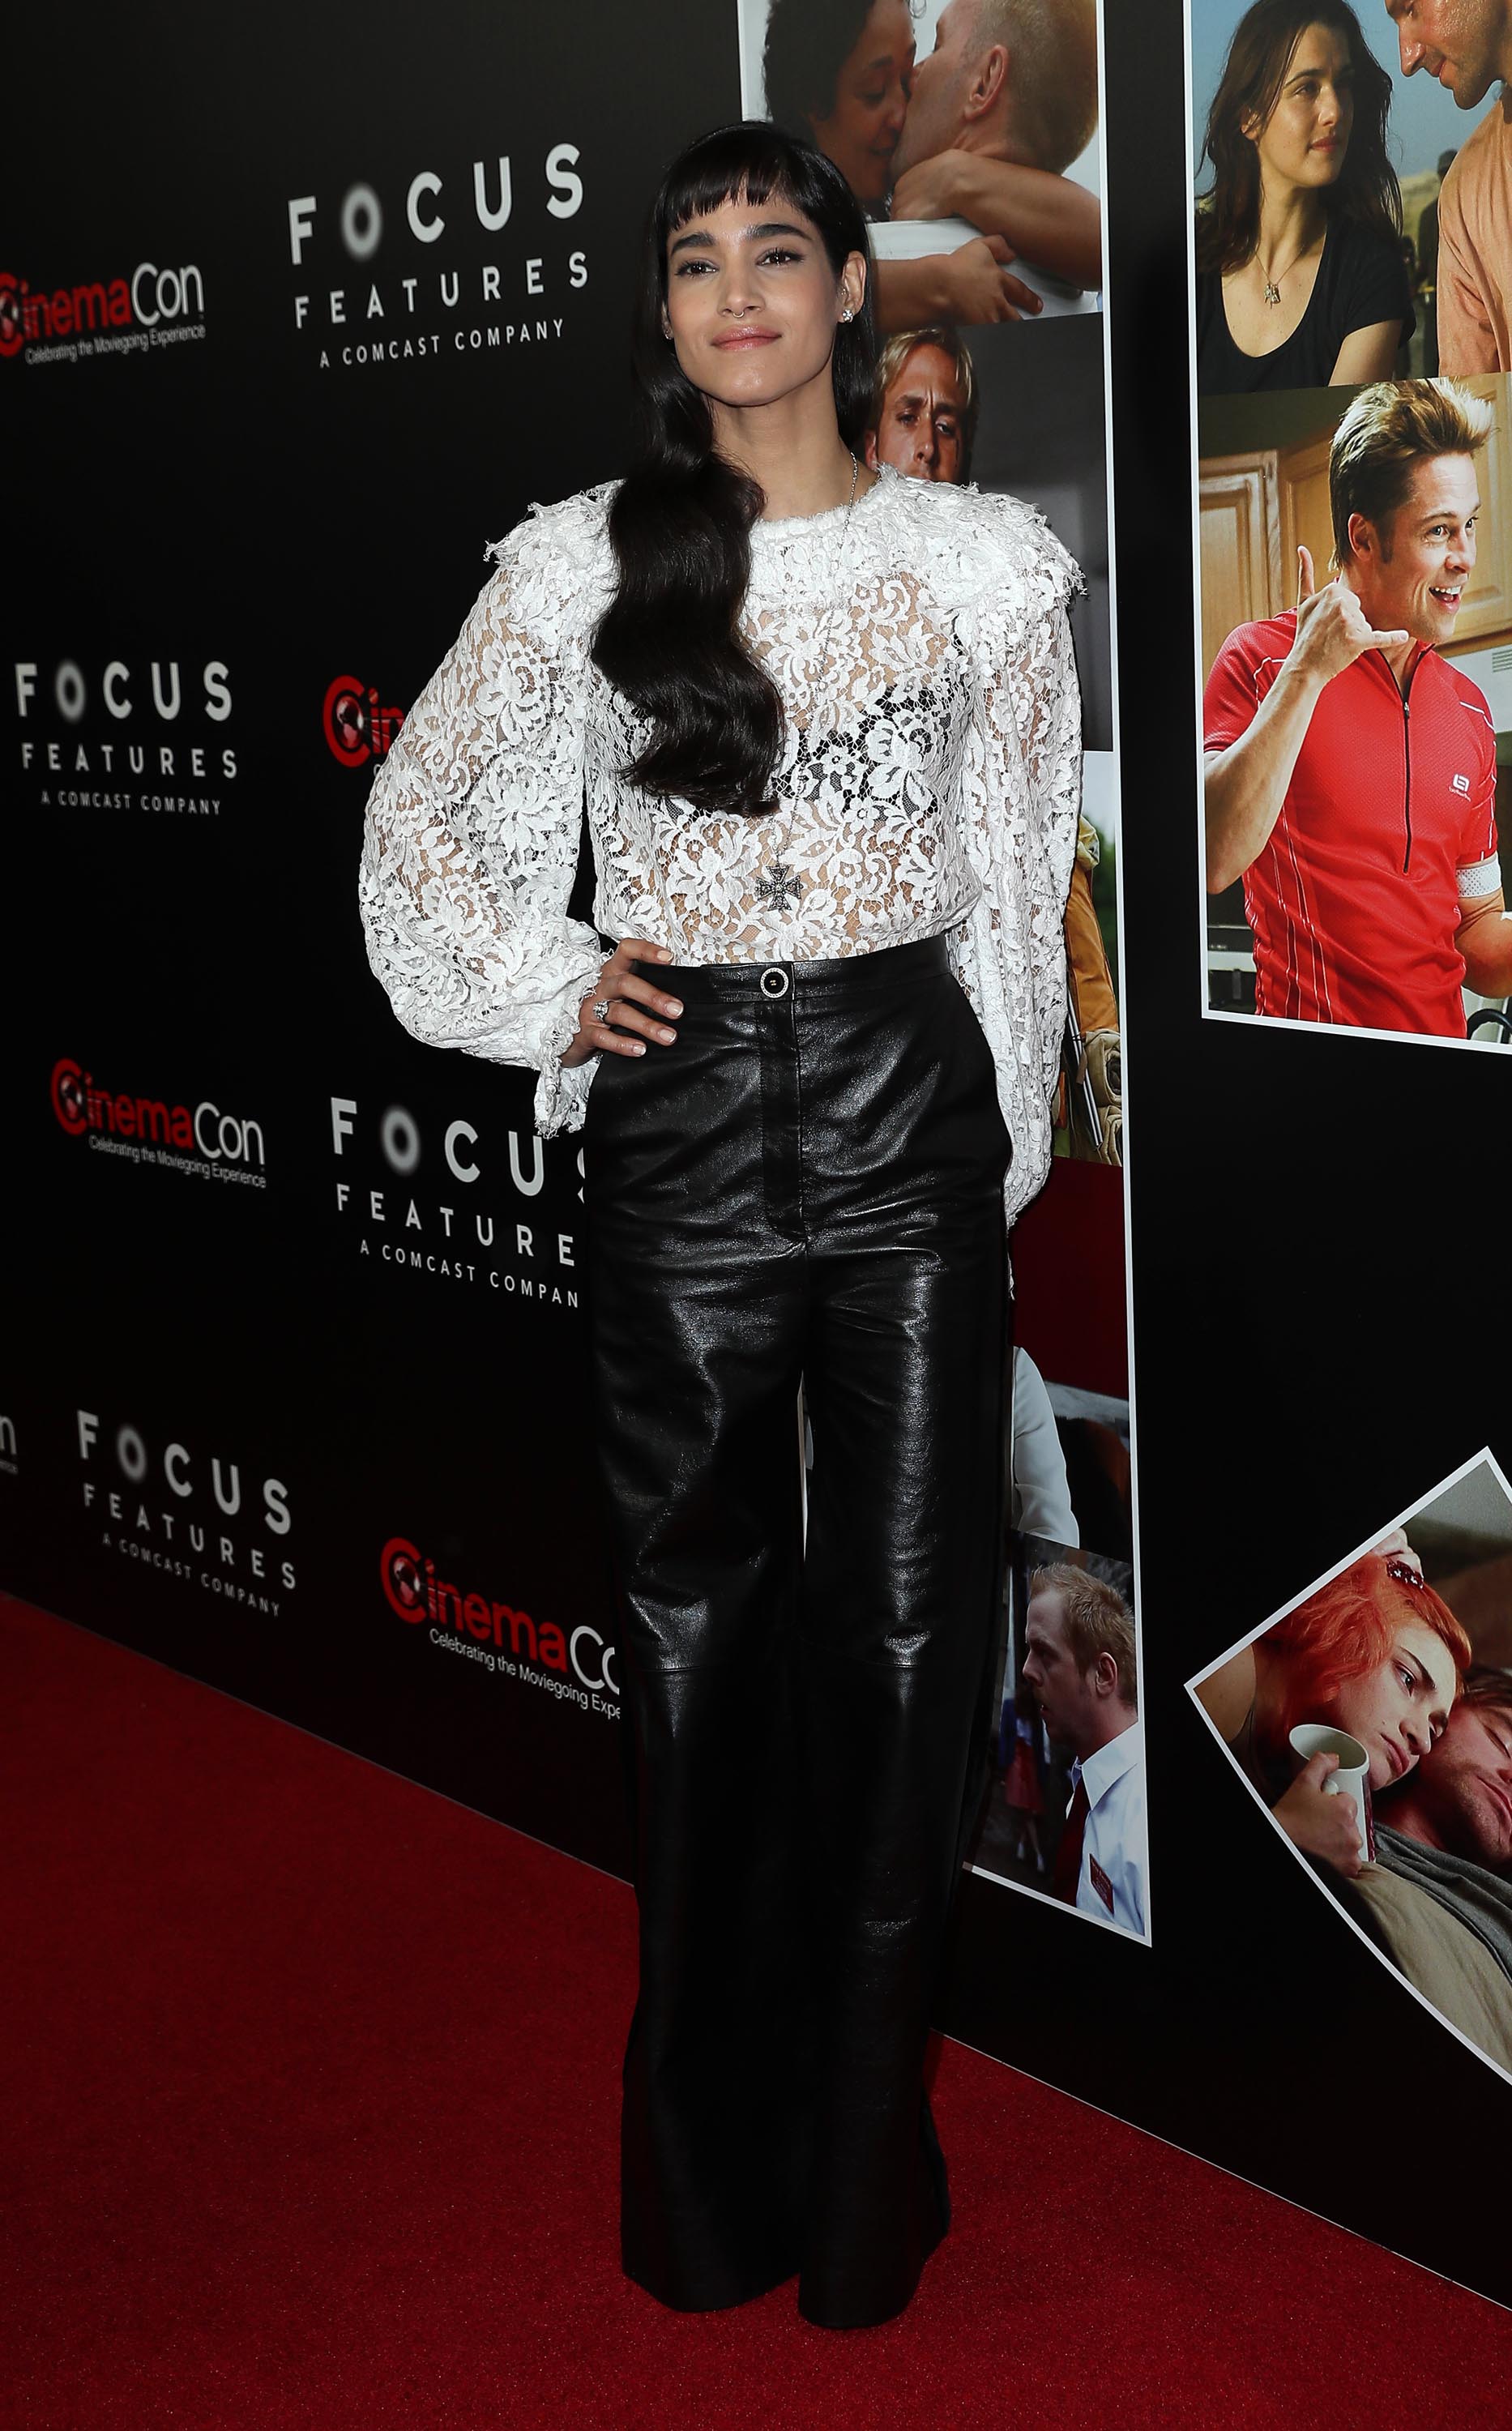 Sofia Boutella attends CinemaCon 2017 Focus Features